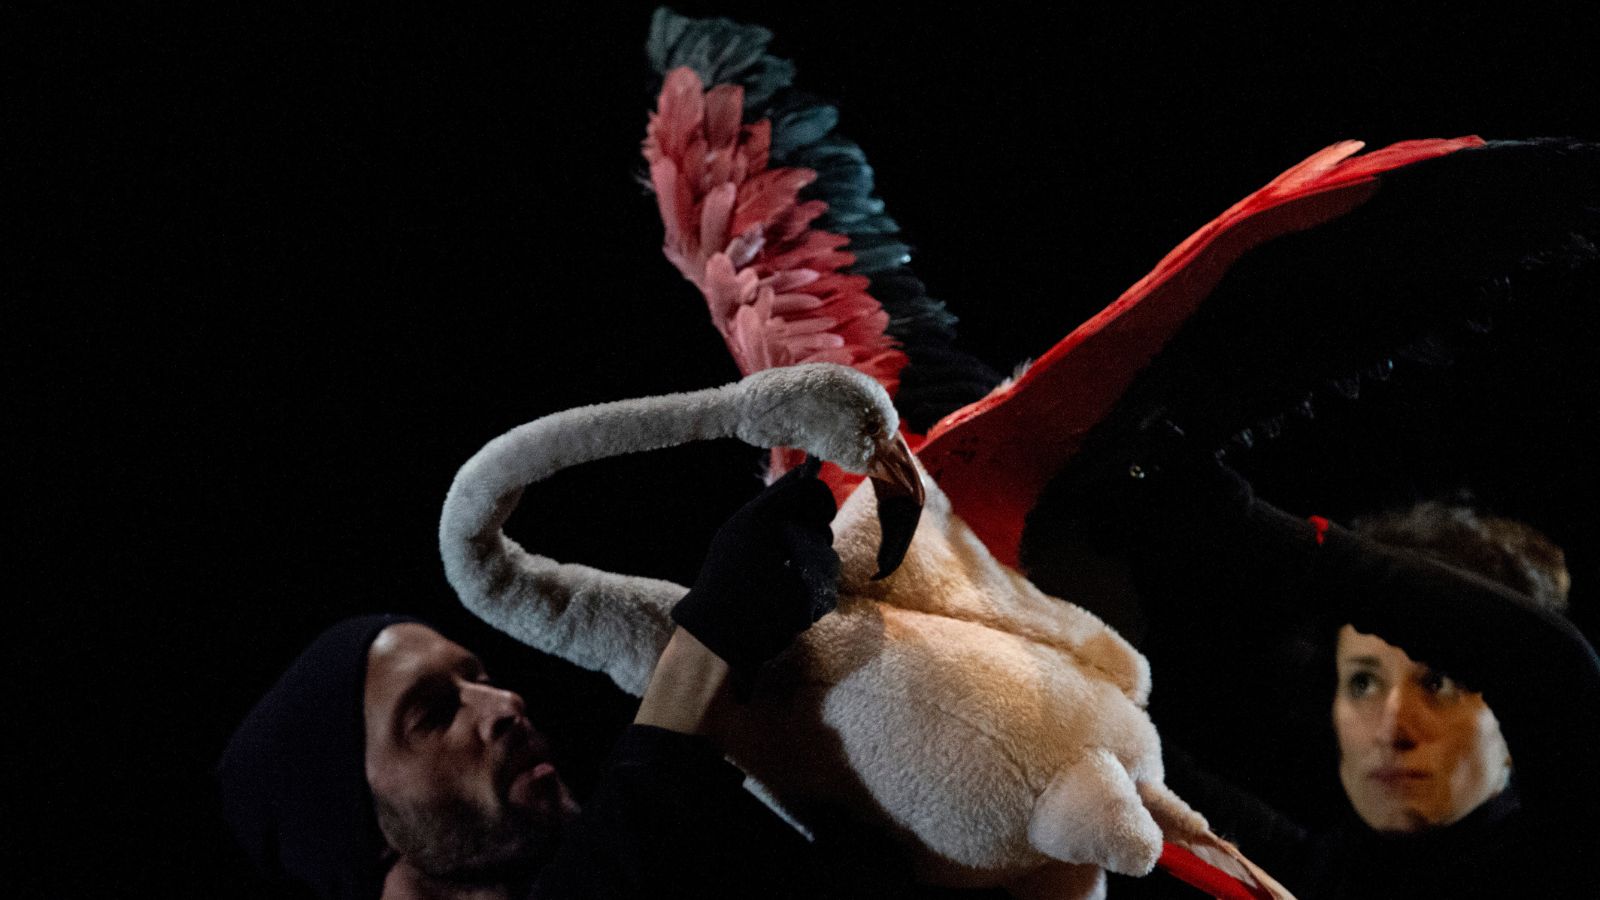 A puppet of a pink flamingo flies through the air controlled by two ladies in black.